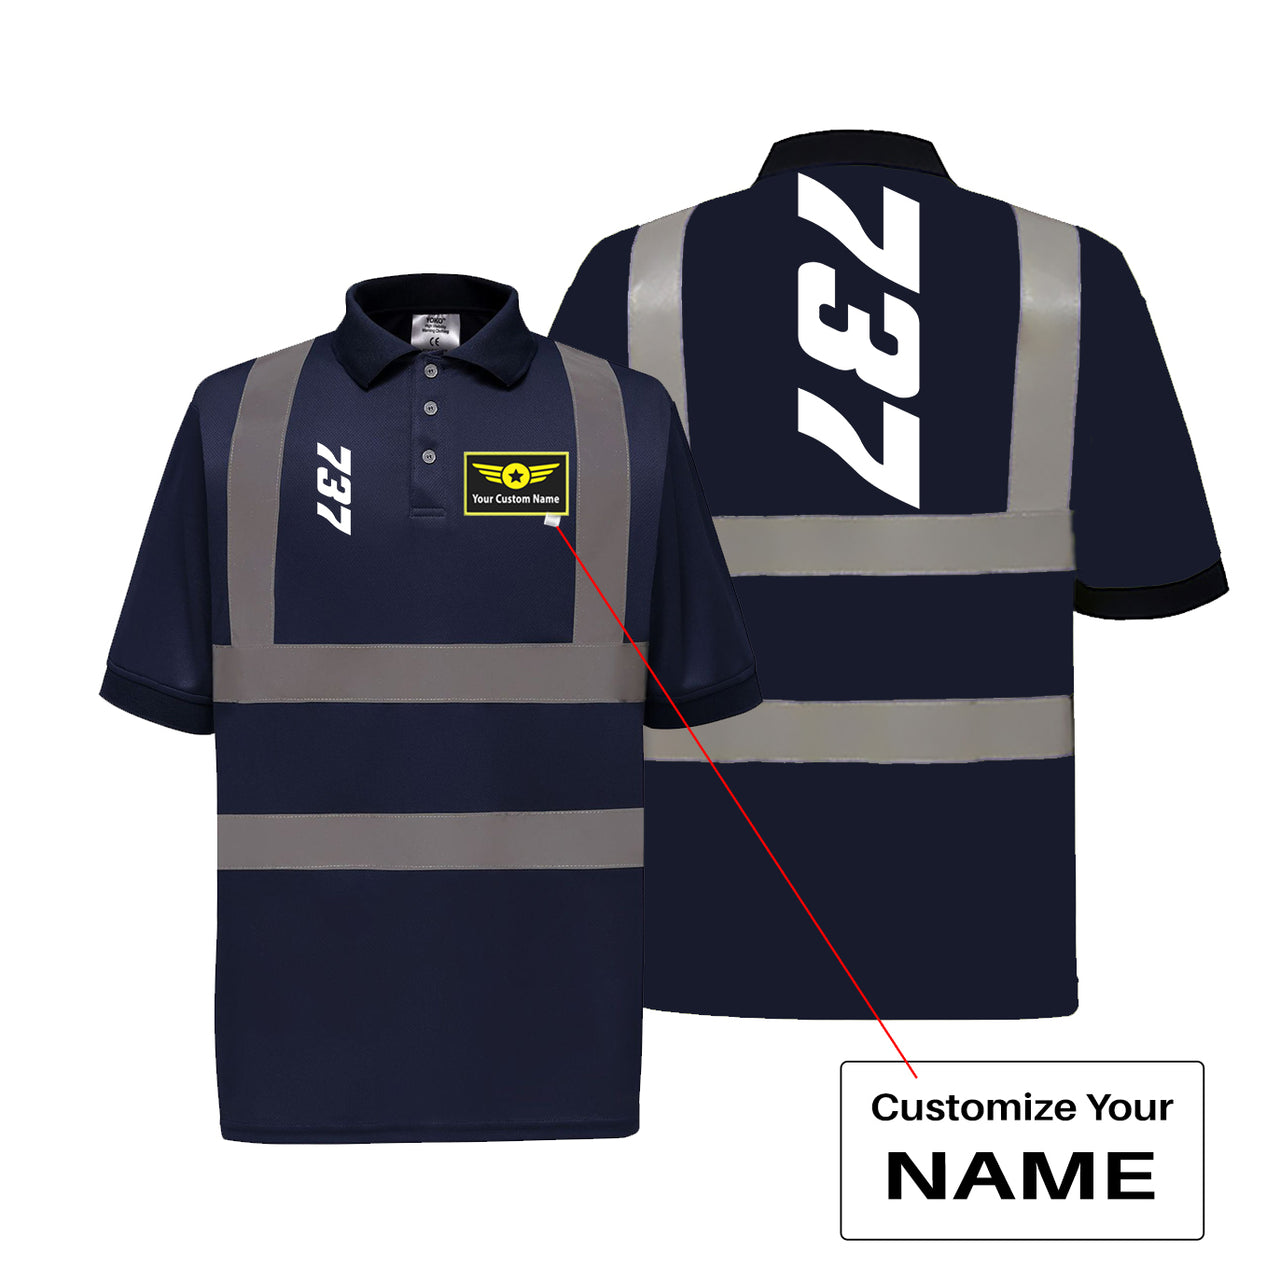 Boeing 737 Text Designed Reflective Polo T-Shirts